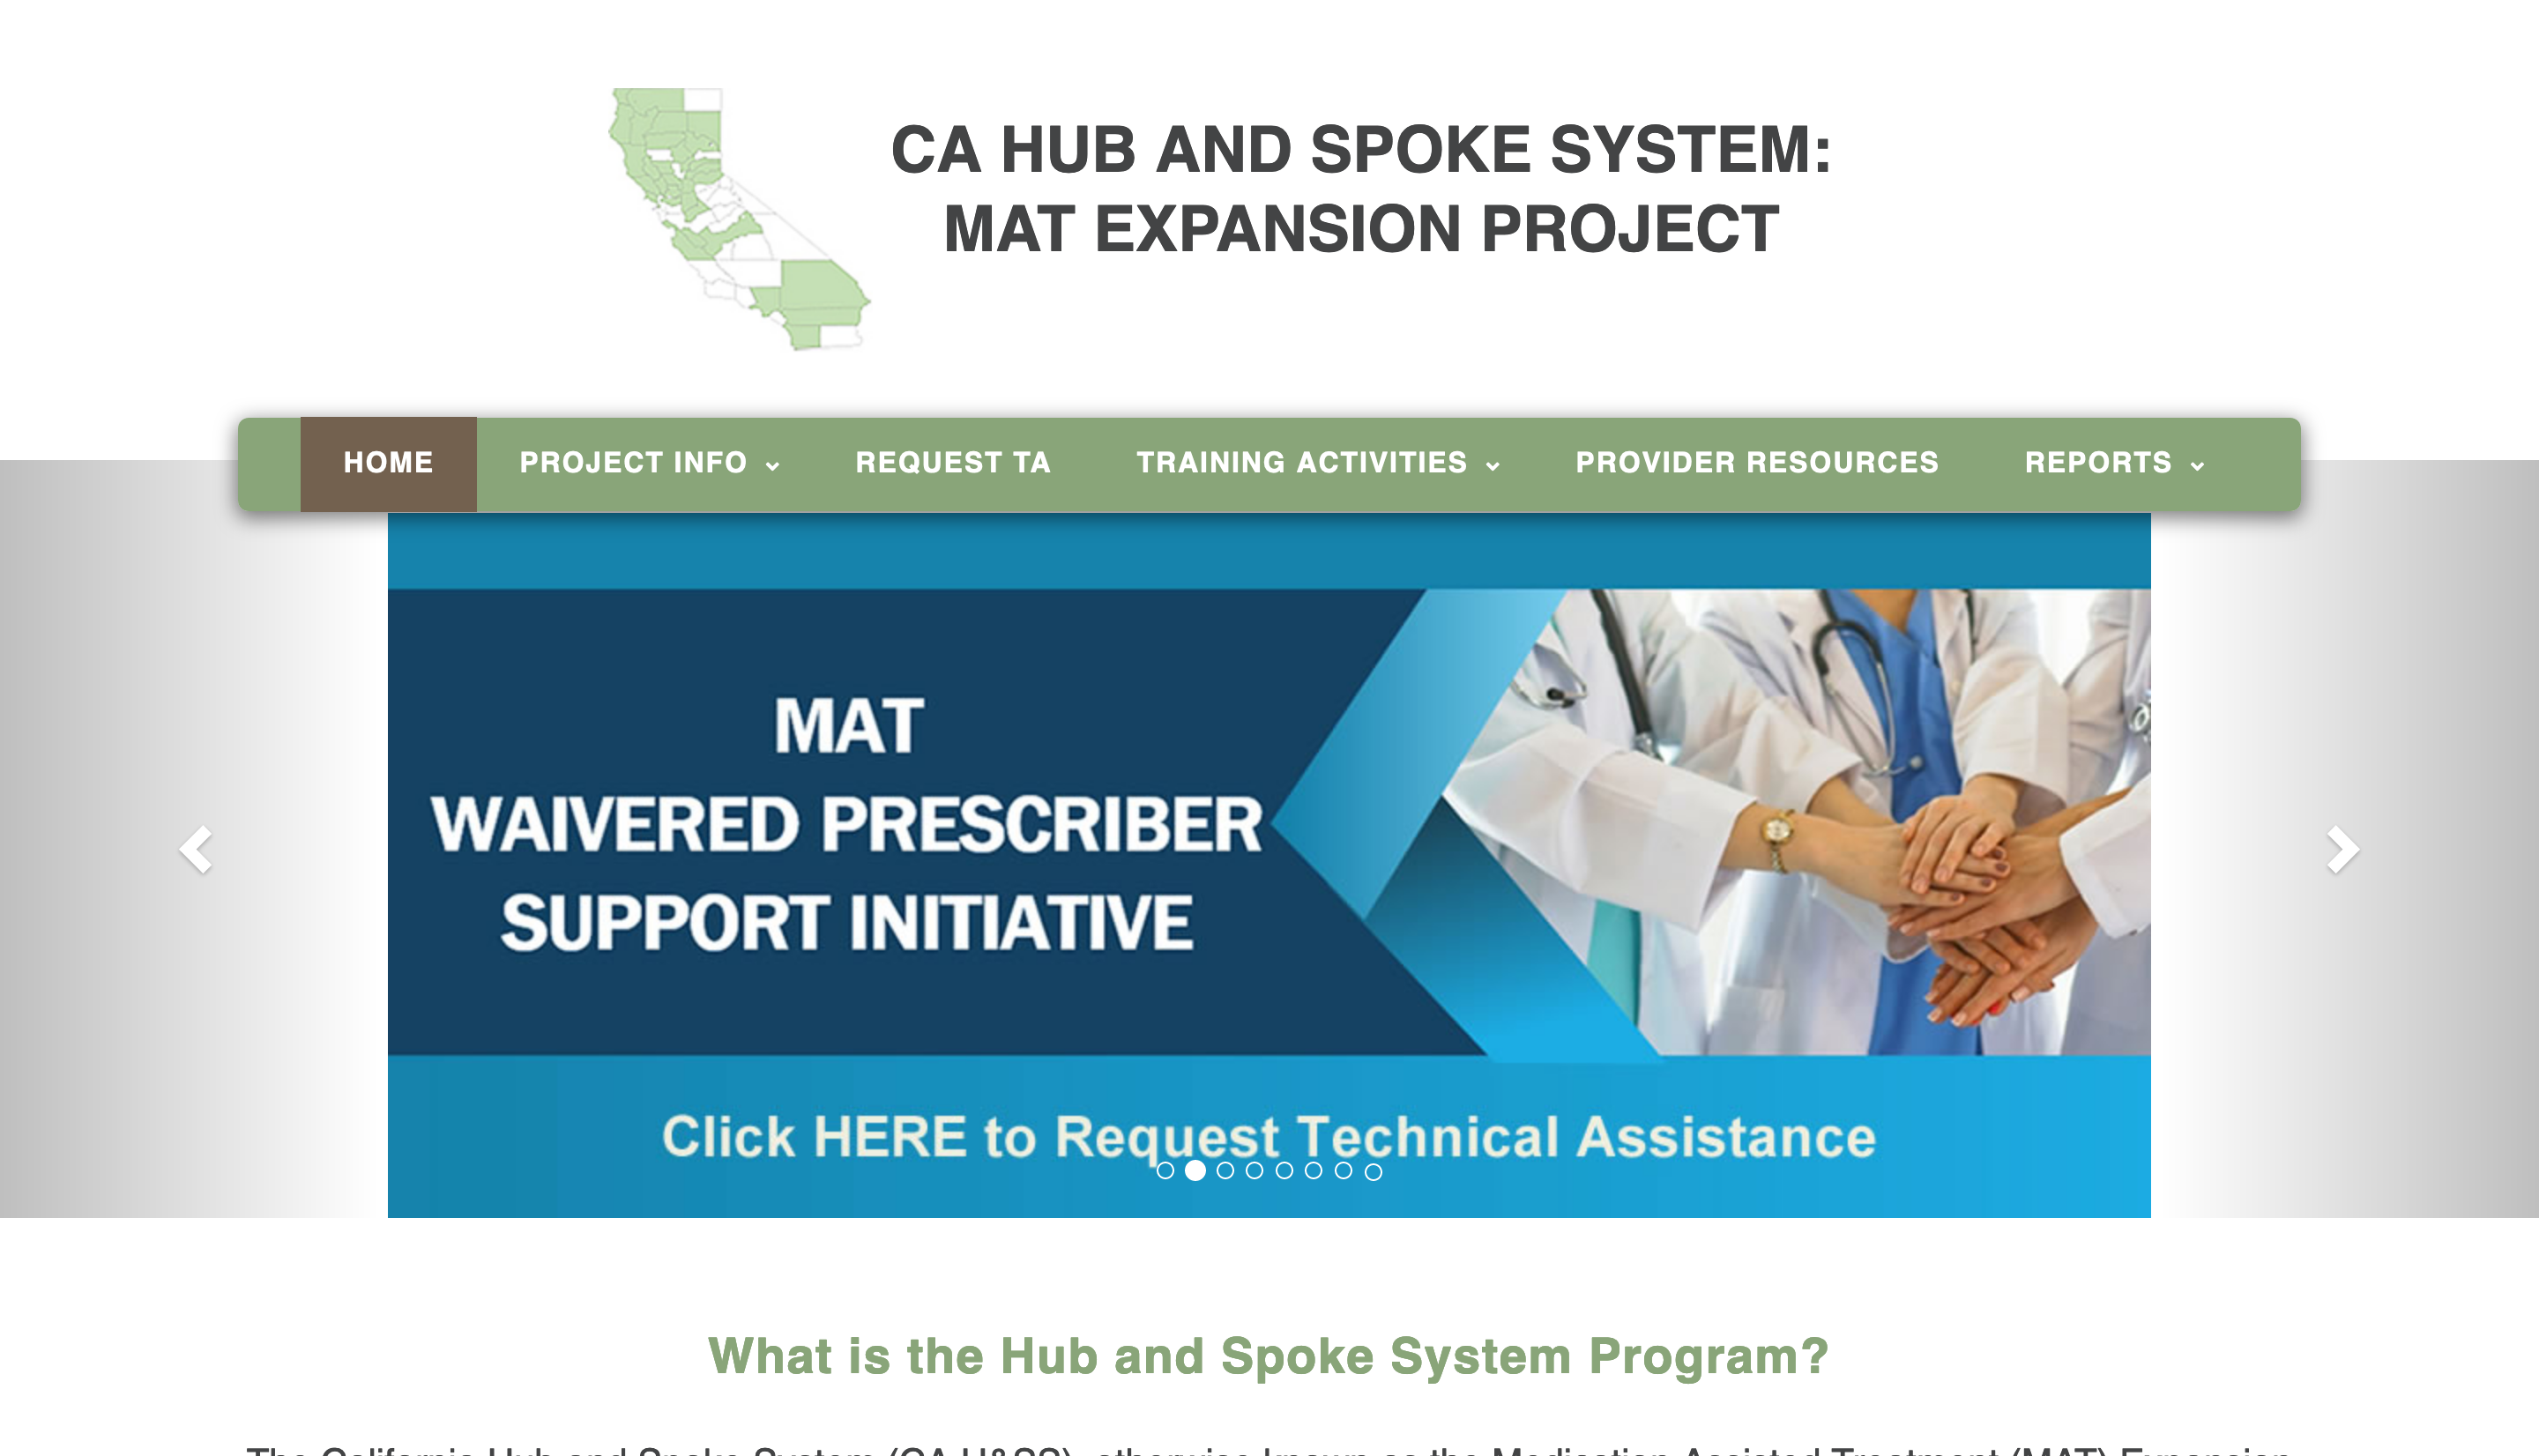 Read California Hub and Spoke System on UCLAISAP.org.